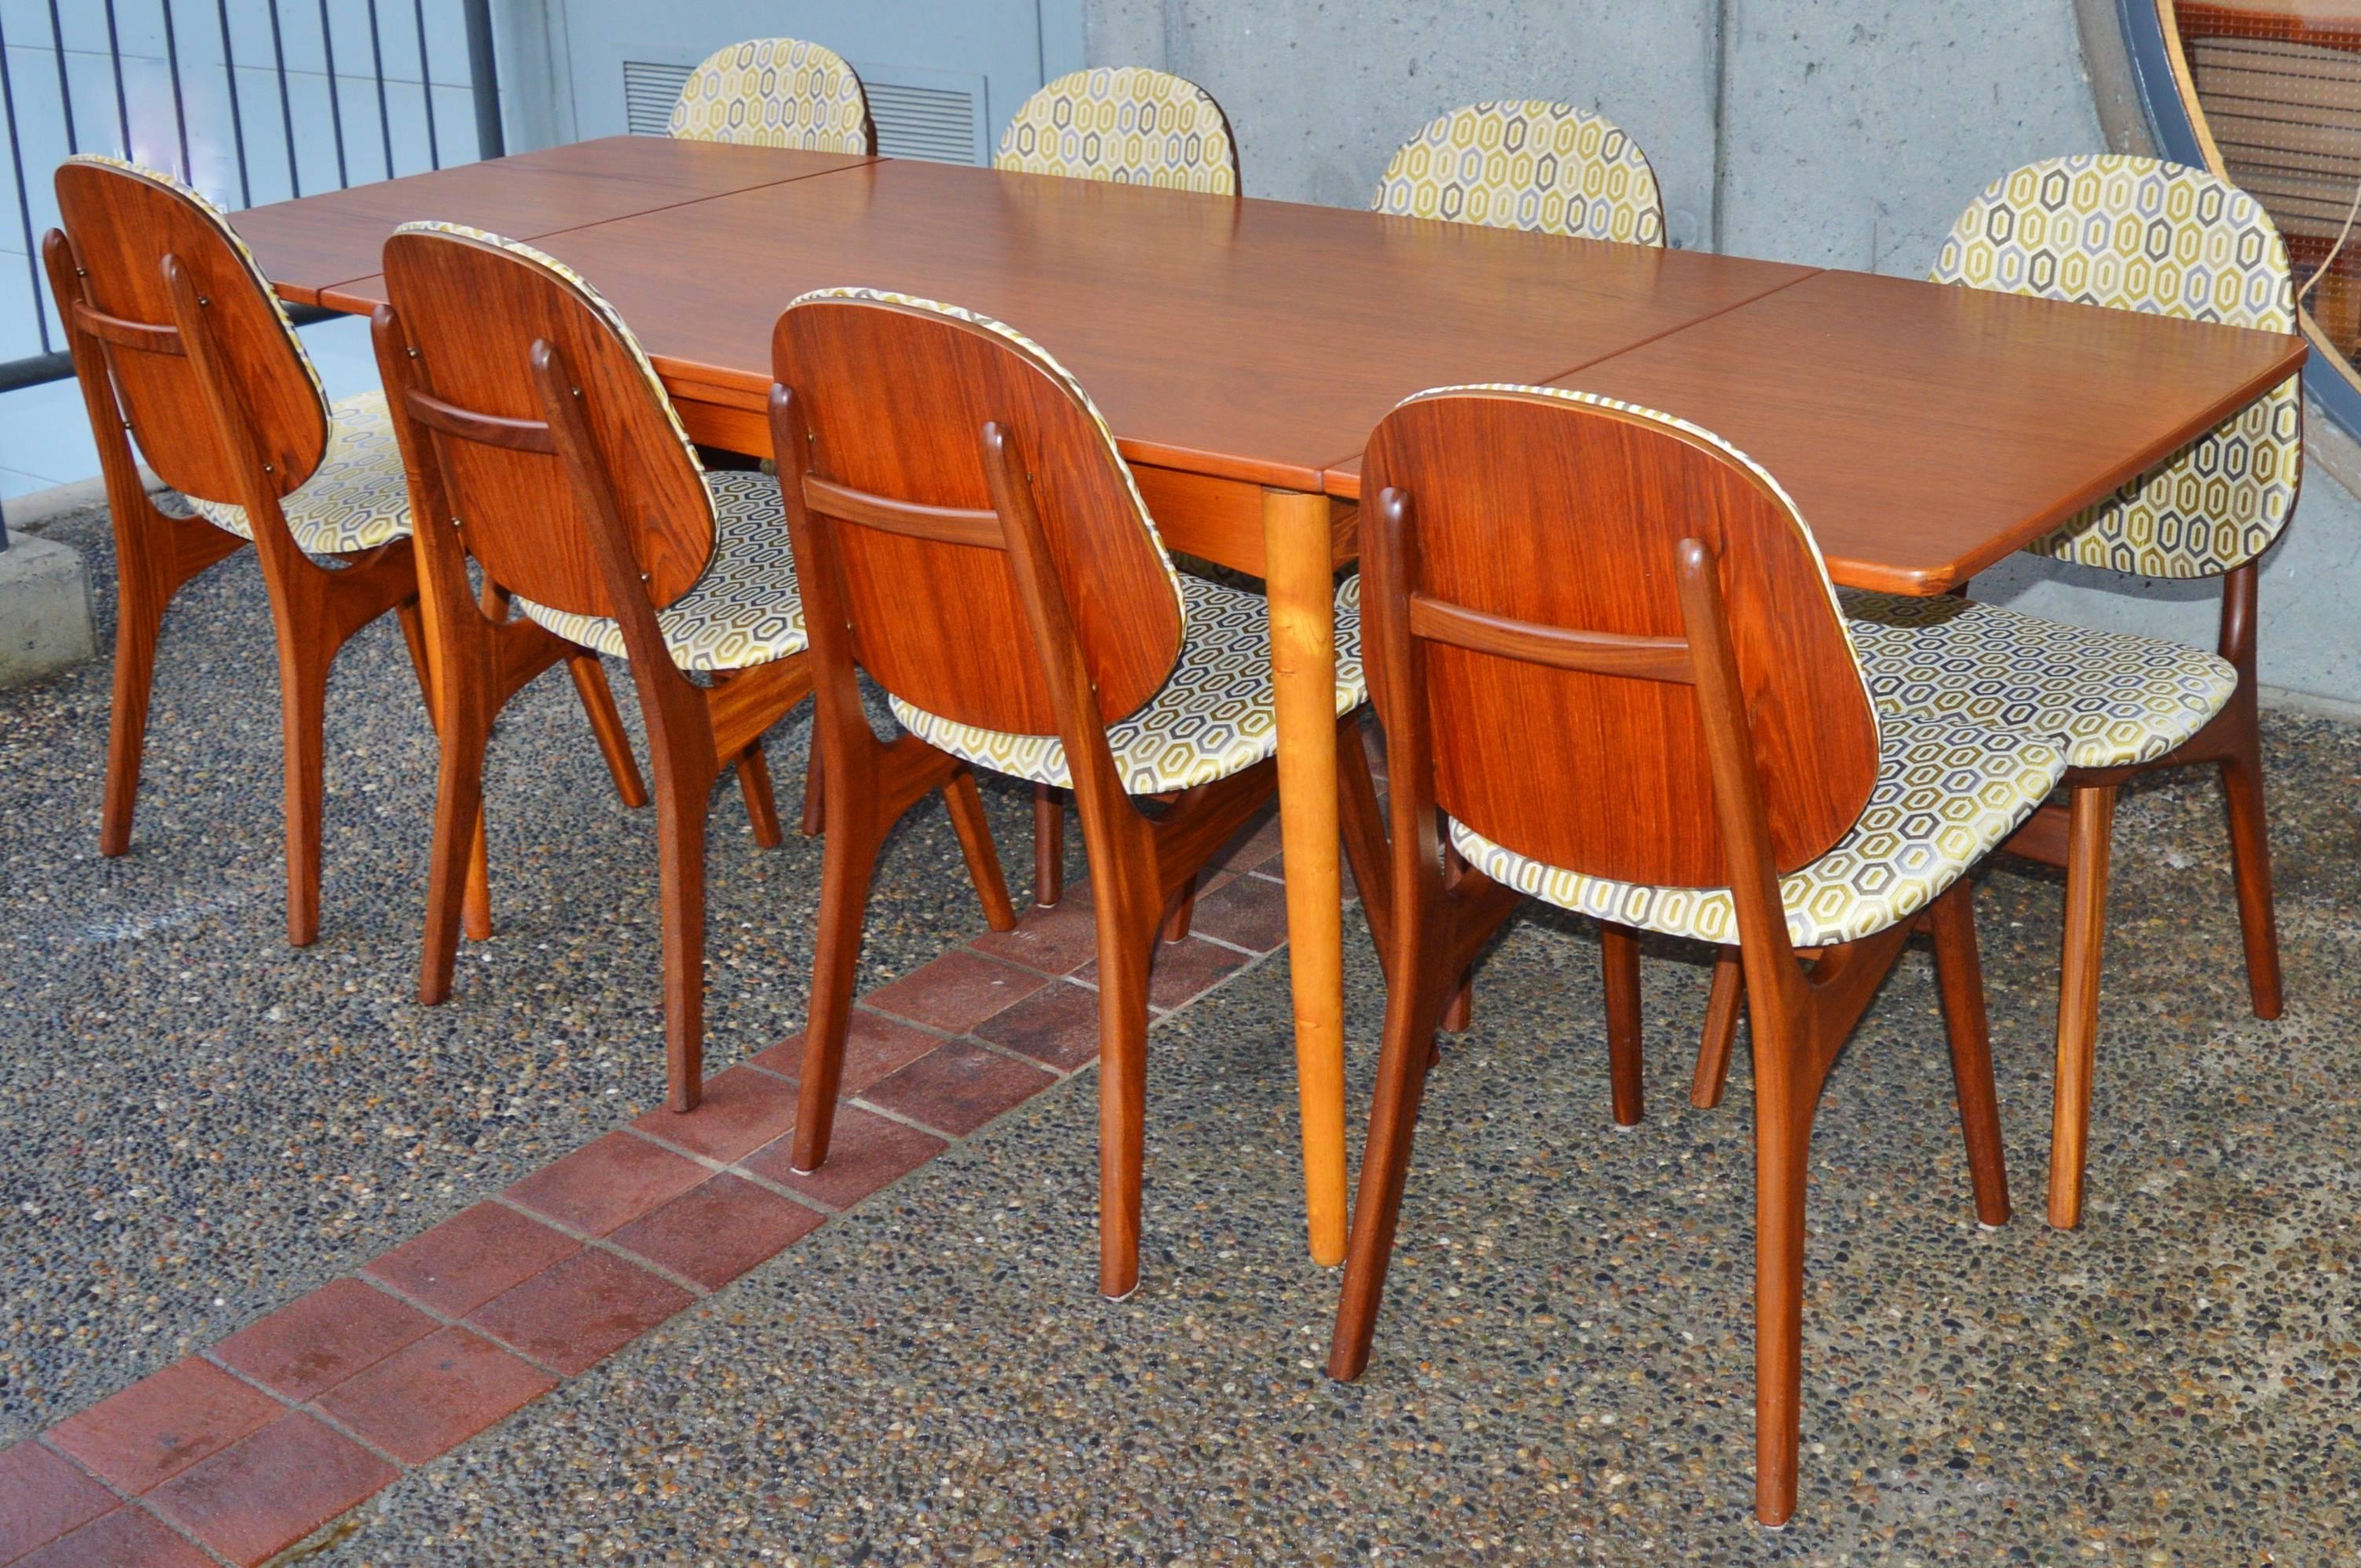 This is a totally gorgeous set of eight Danish modern teak dining chairs by Arne Hovmand-Olsen, completely restored and reupholstered with new foam and a wonderful modern high end graphic upholstery. I love the floating wood 